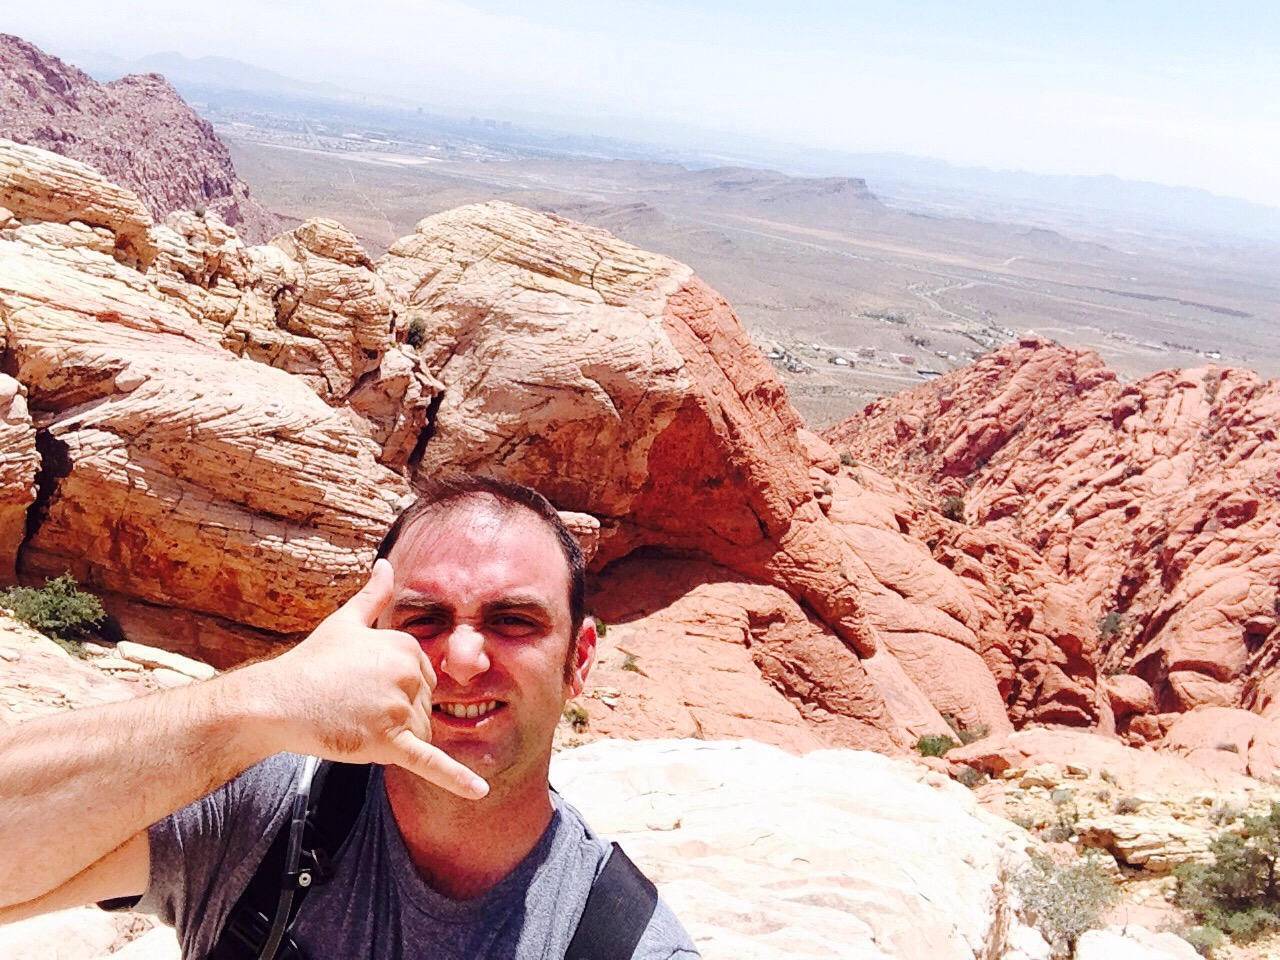 man with strained expression and strange hand gesture at red rock canyon in las vegas